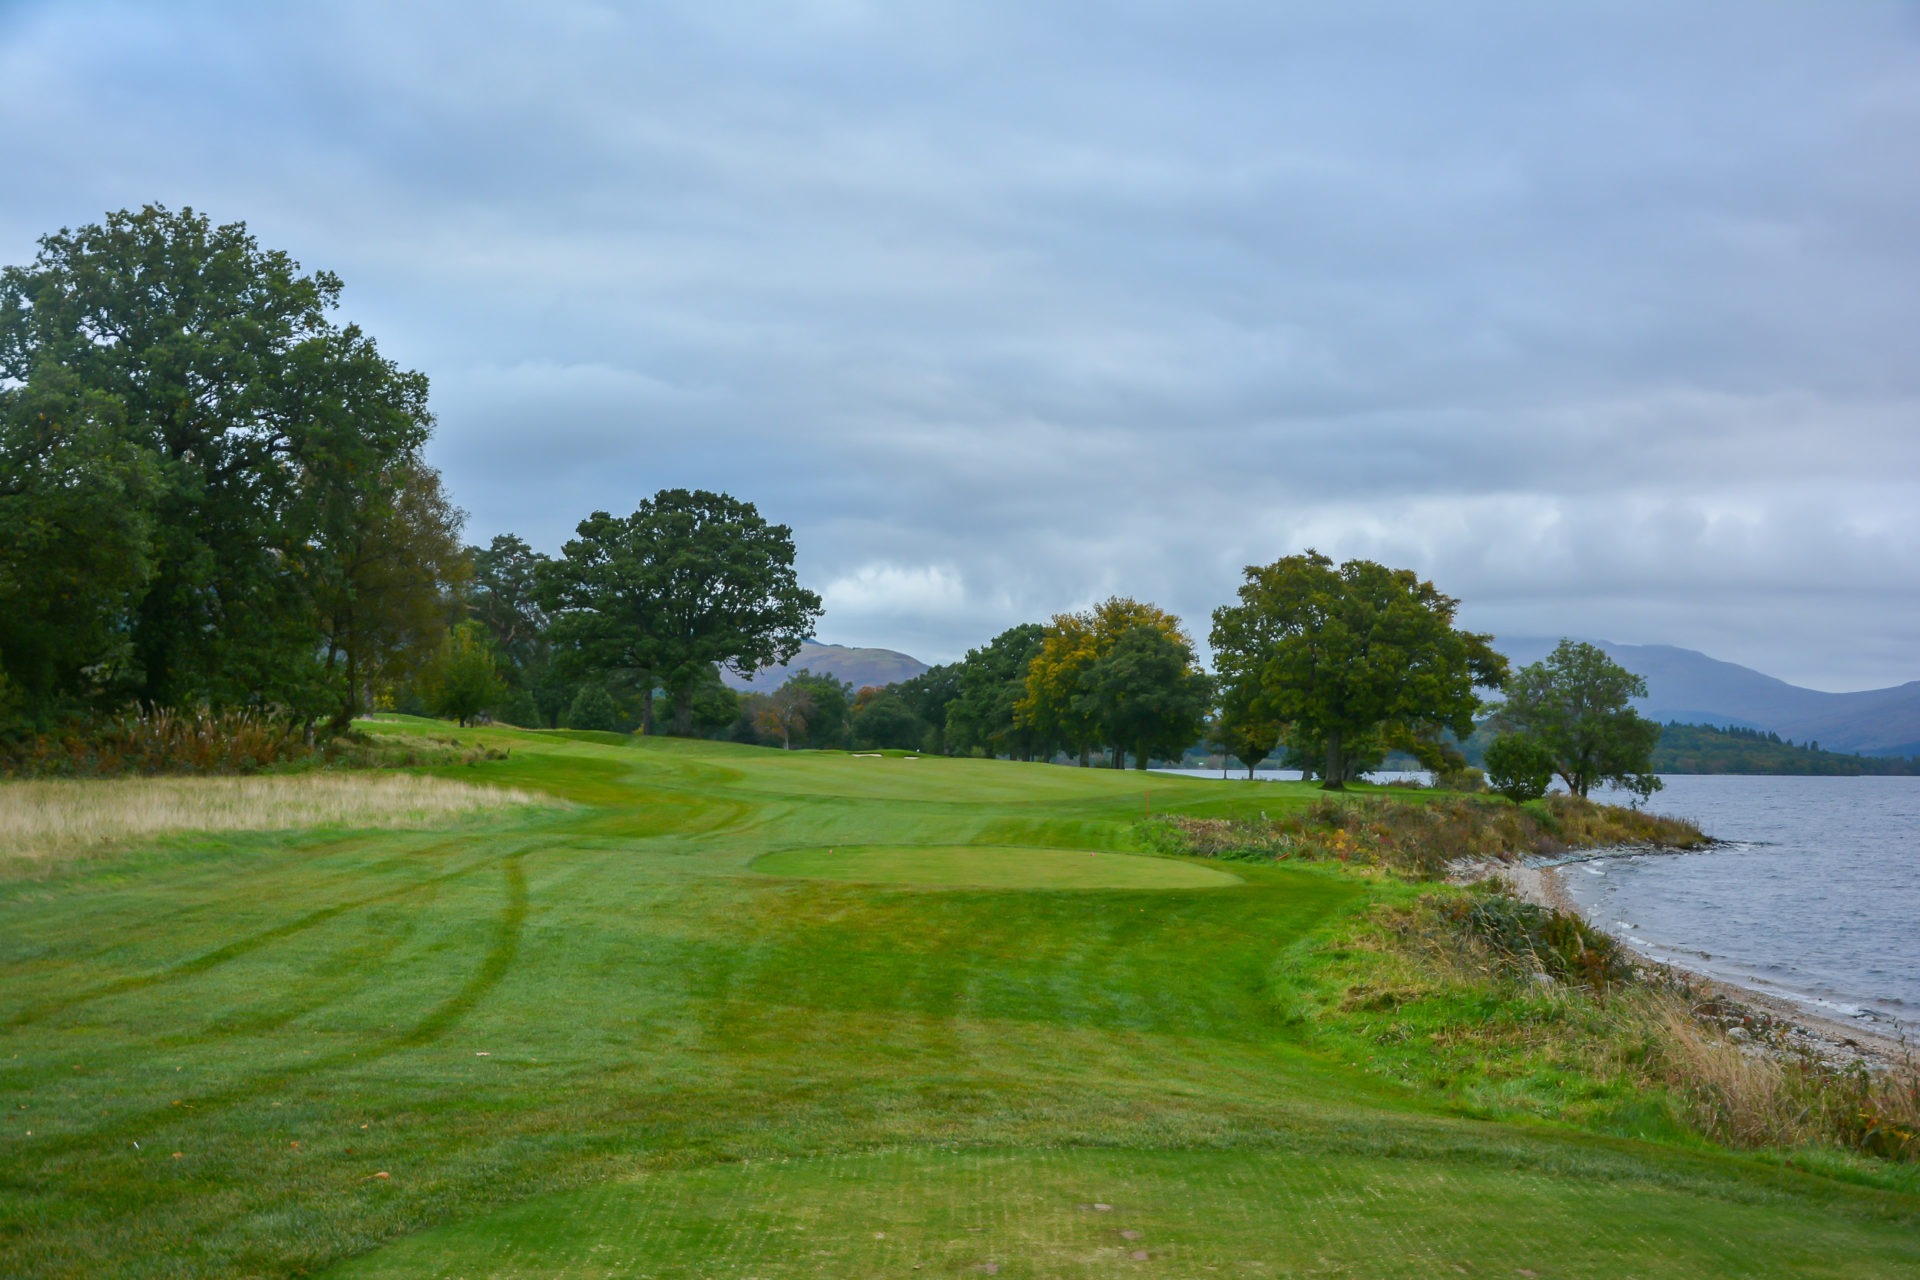 The tee shot on the 6th at Loch Lomond